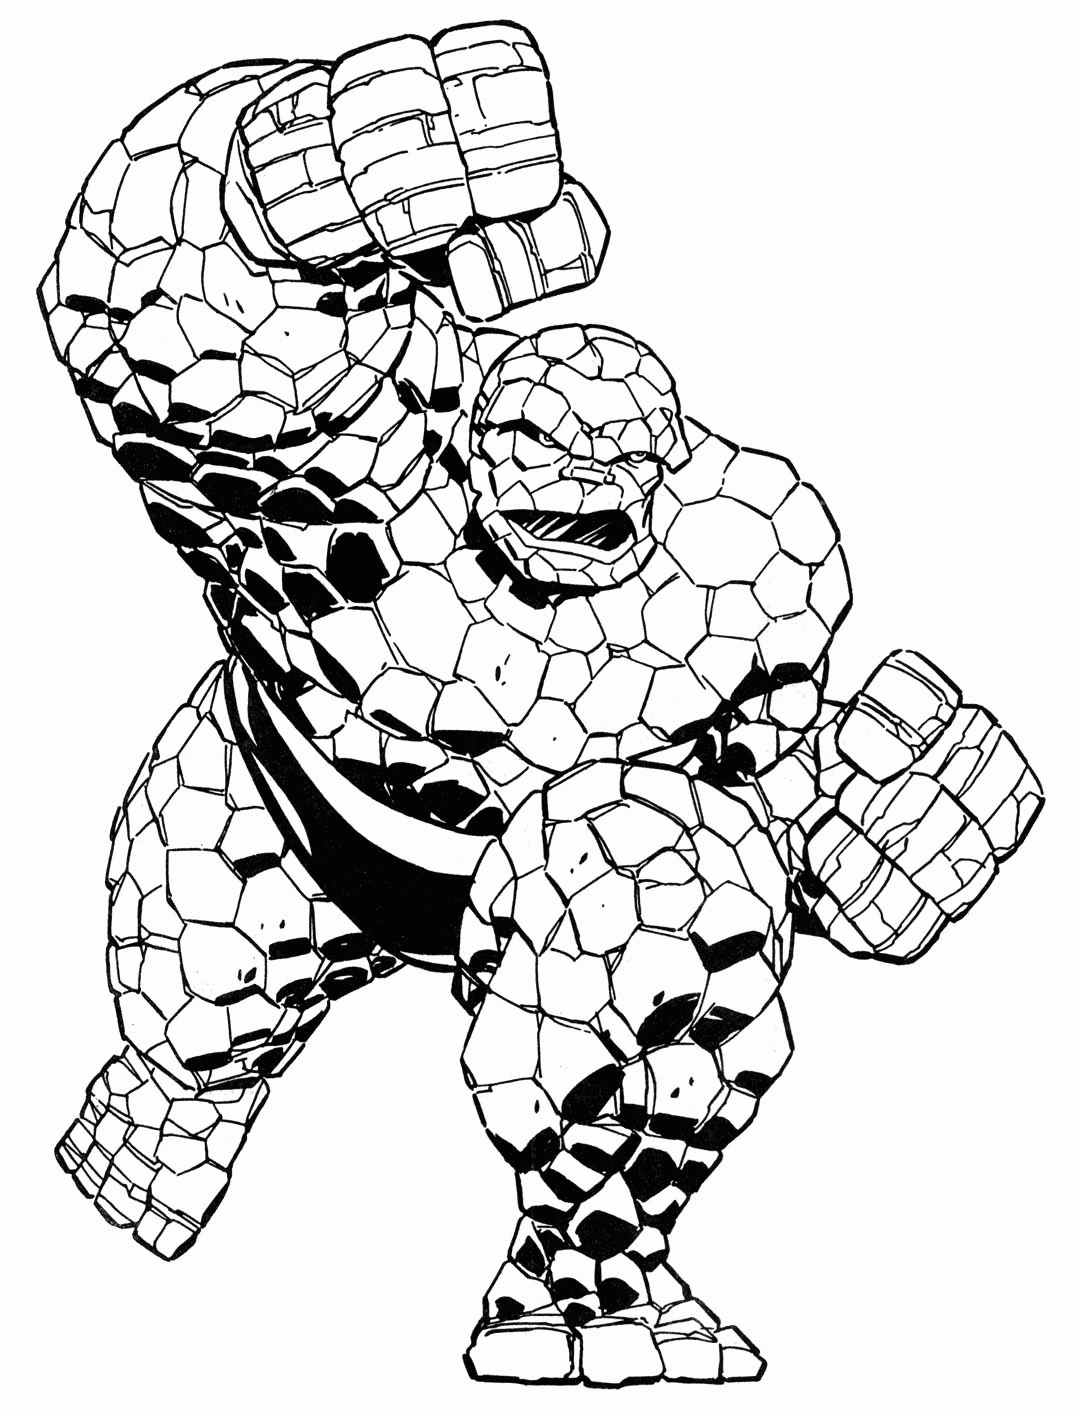 marvel coloring pages to print - High Quality Coloring Pages